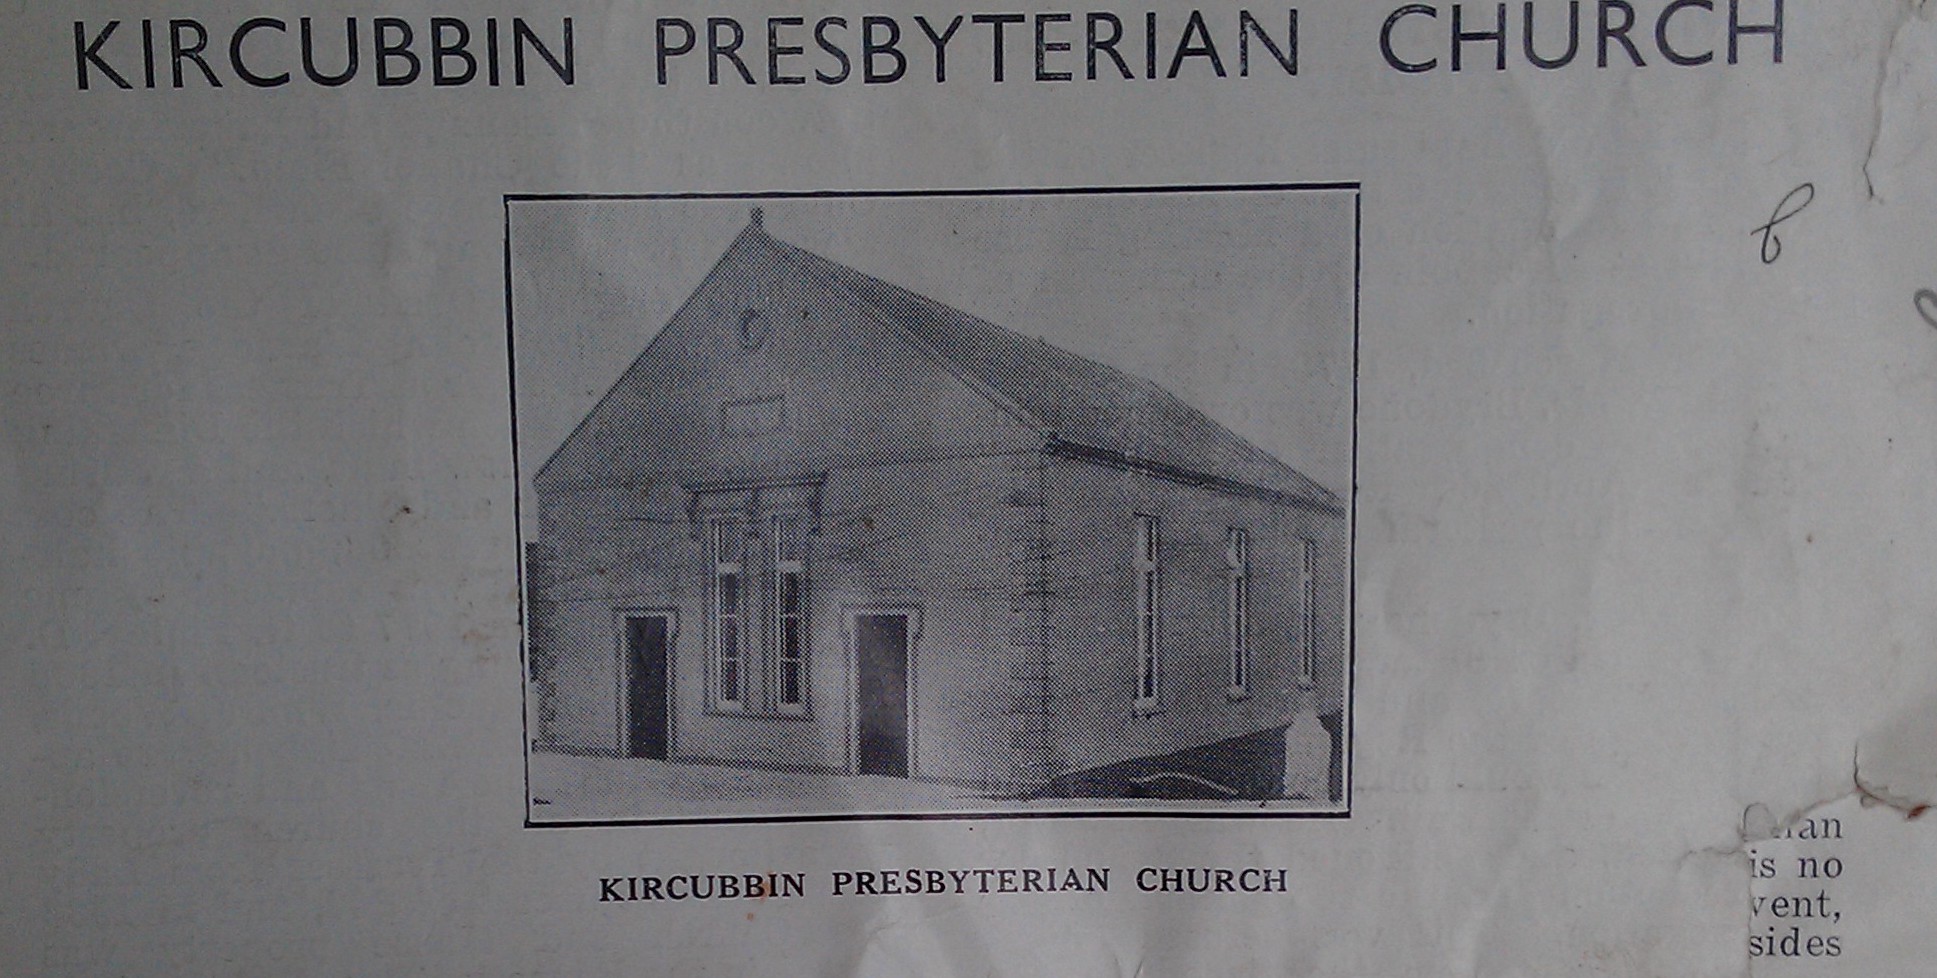 image from Early Church History